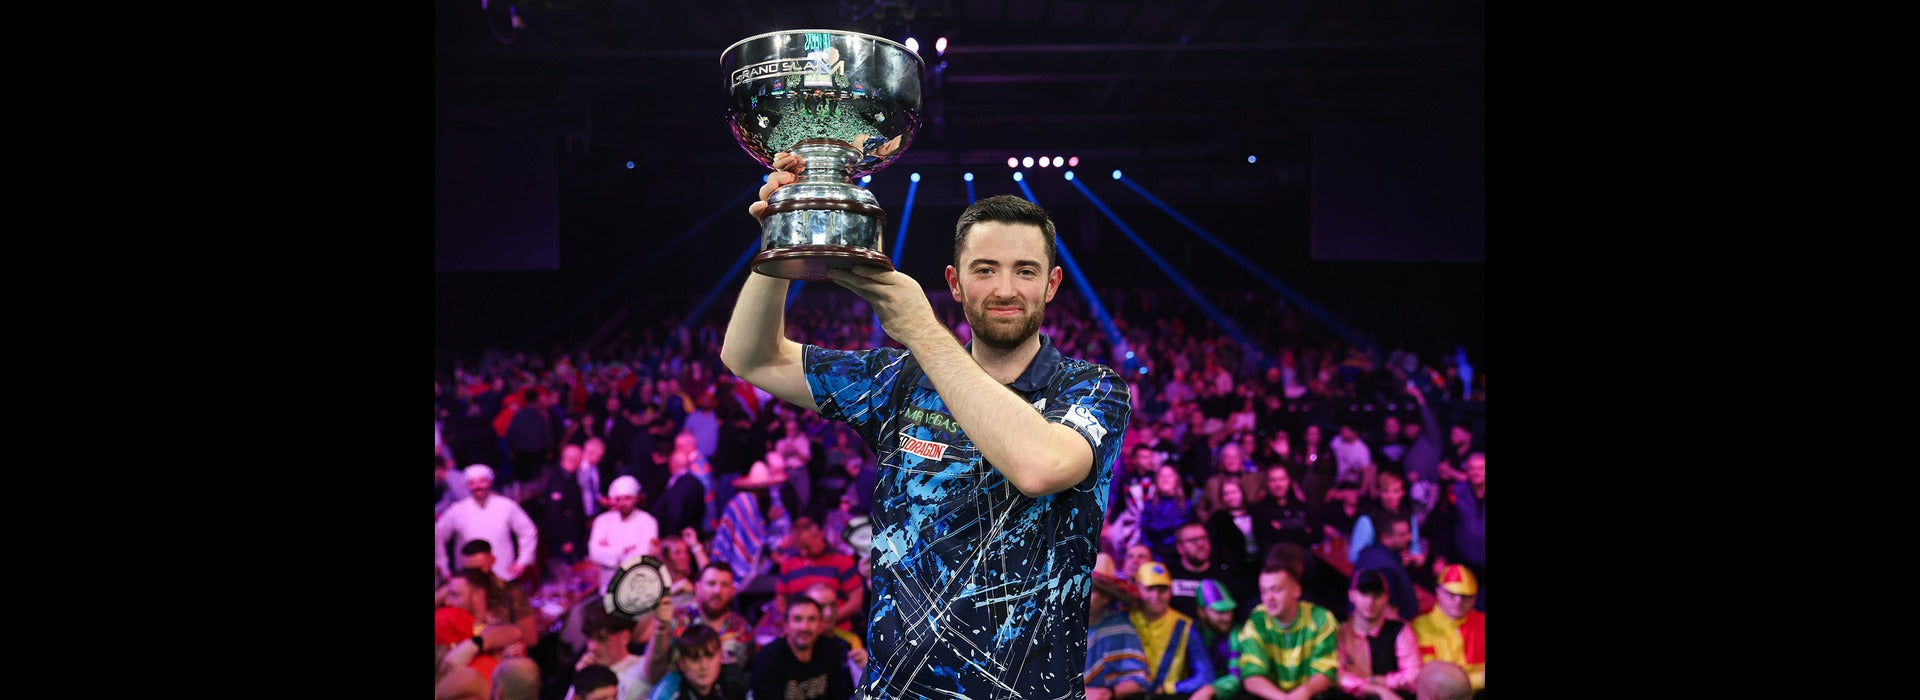 UNSTOPPABLE HUMPHRIES RACES TO MR VEGAS GRAND SLAM OF DARTS TITLE